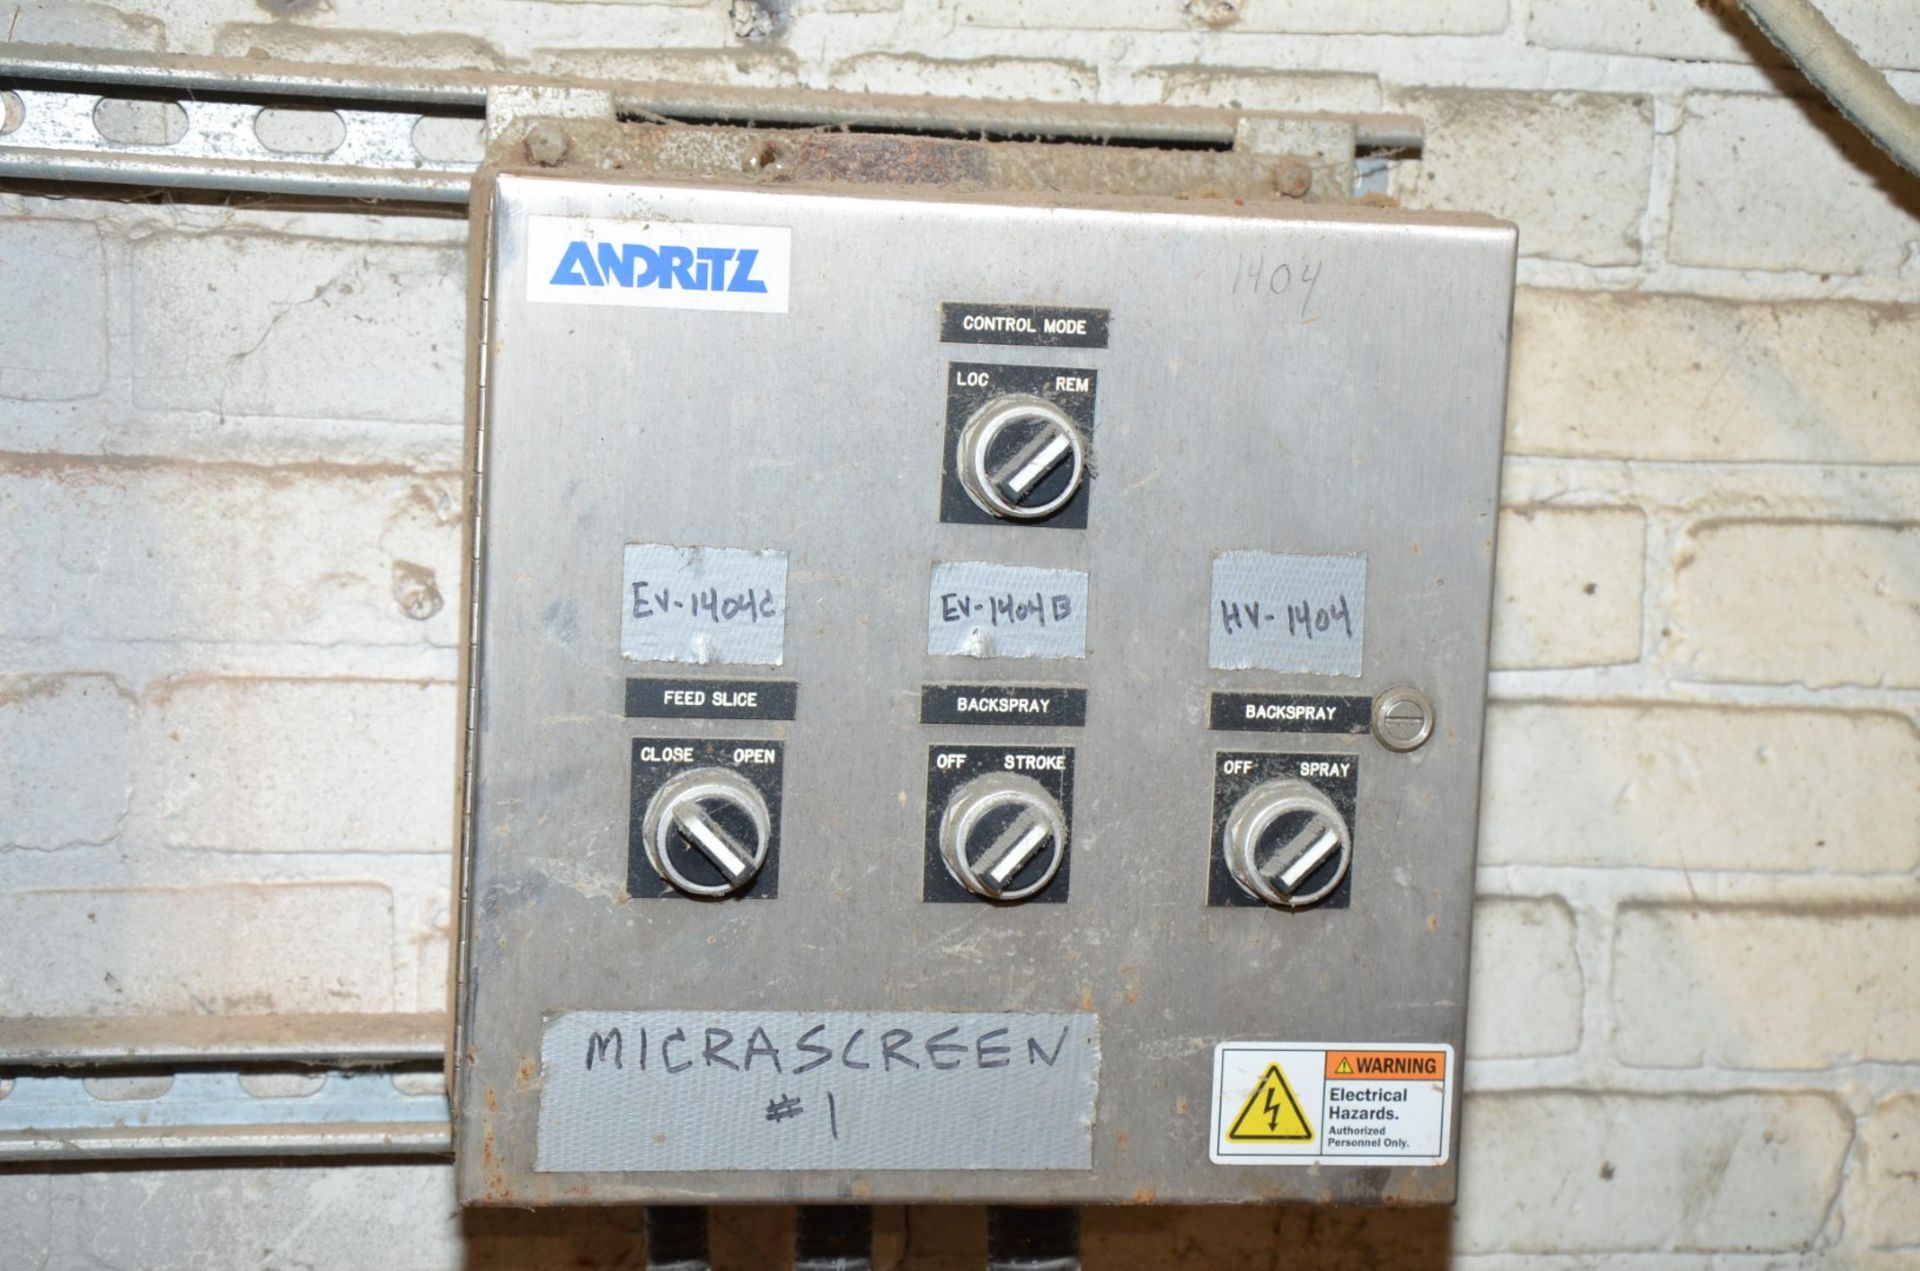 ANDRITZ (2019) MICRASCREEN MS3 STAINLESS STEEL STATIONARY PRESSURE FED VERTICAL SCREEN SUITABLE - Image 7 of 7